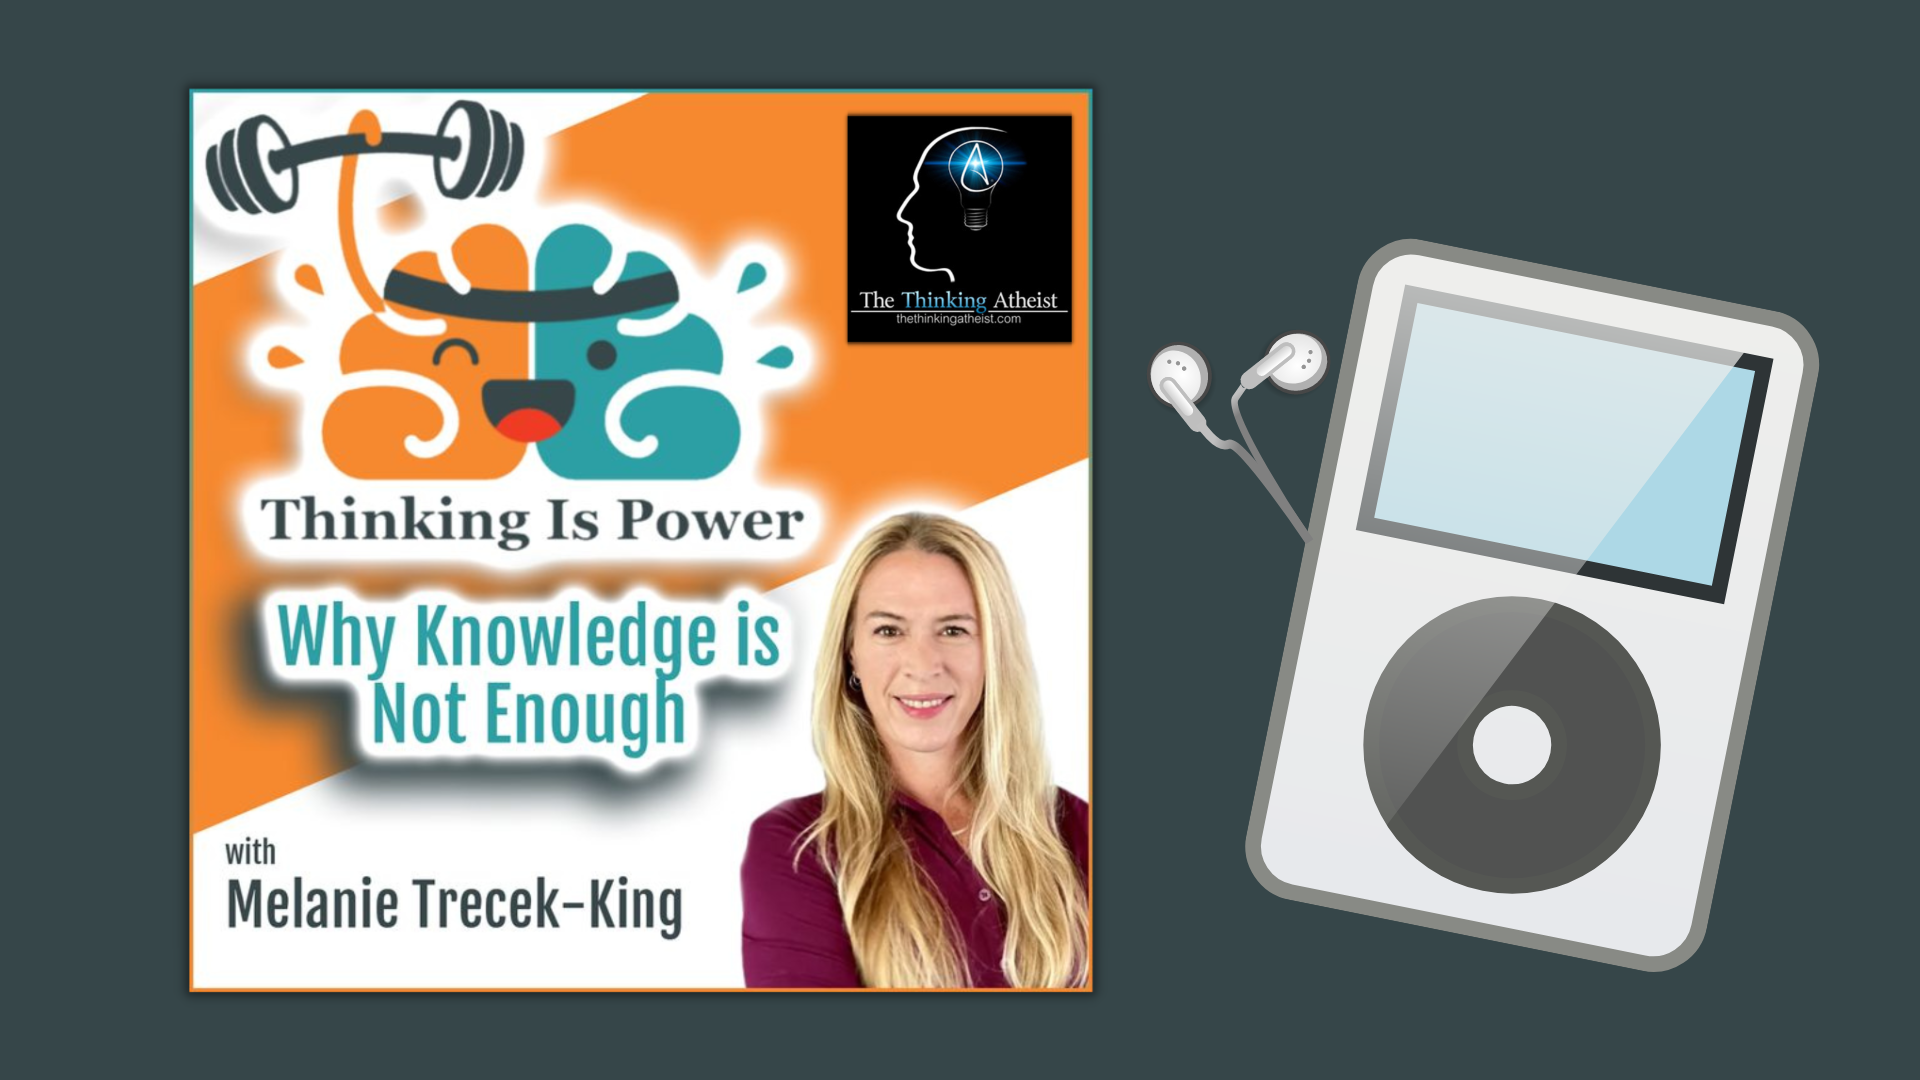 The Thinking Atheist podcast with Melanie Trecek-King from Thinking Is Power